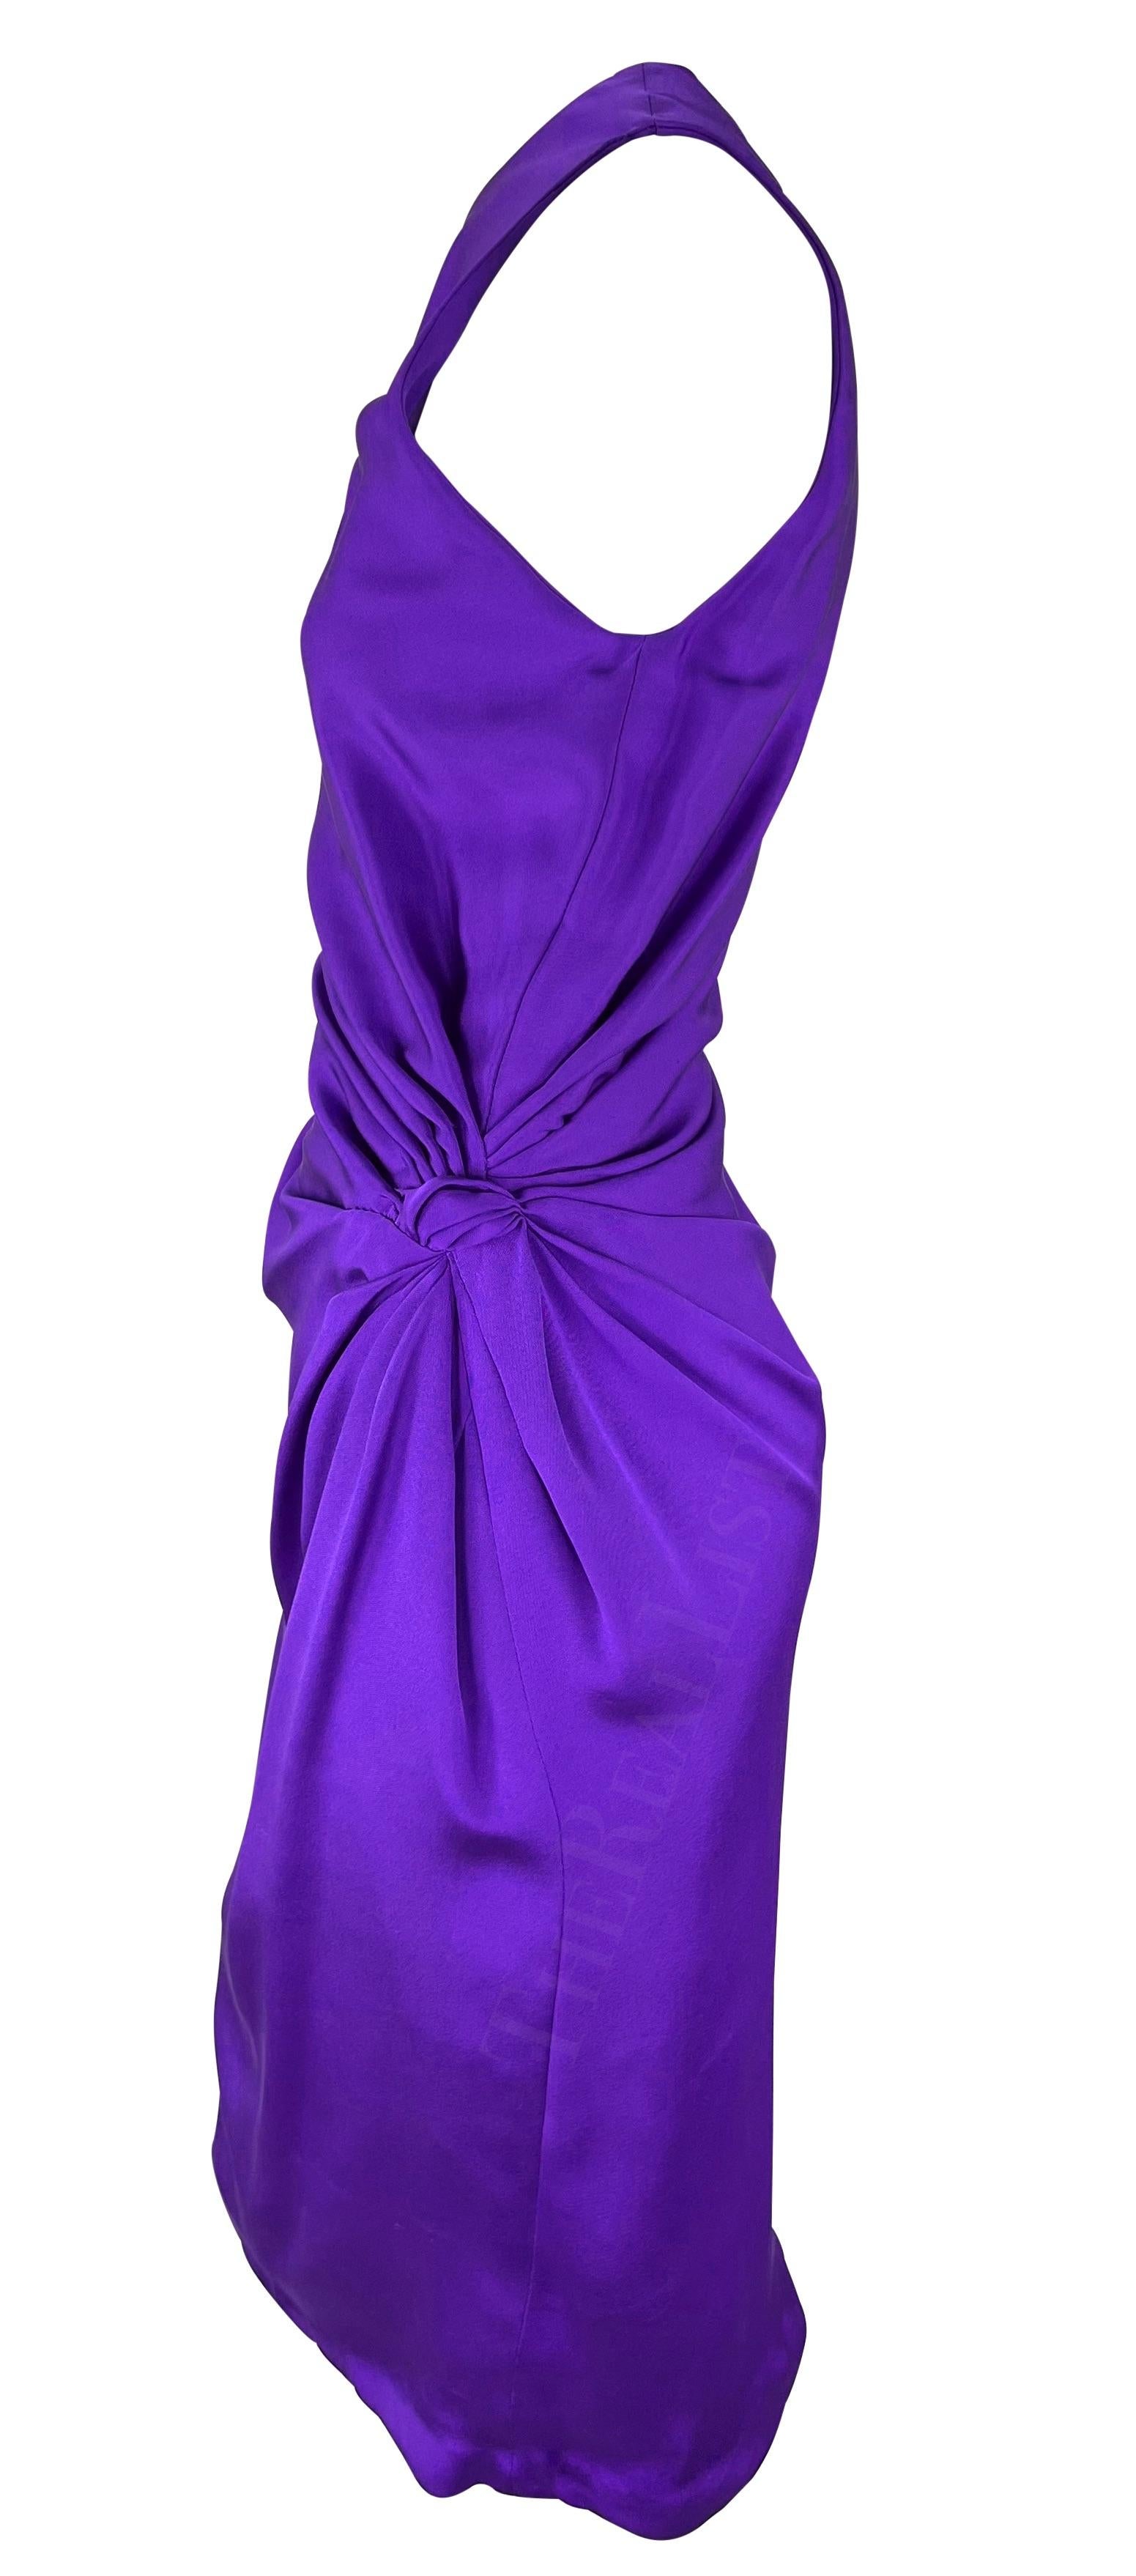 S/S 1991 Gianni Versace Purple Gathered Ruched Sleeveless Cocktail Dress In Good Condition For Sale In West Hollywood, CA